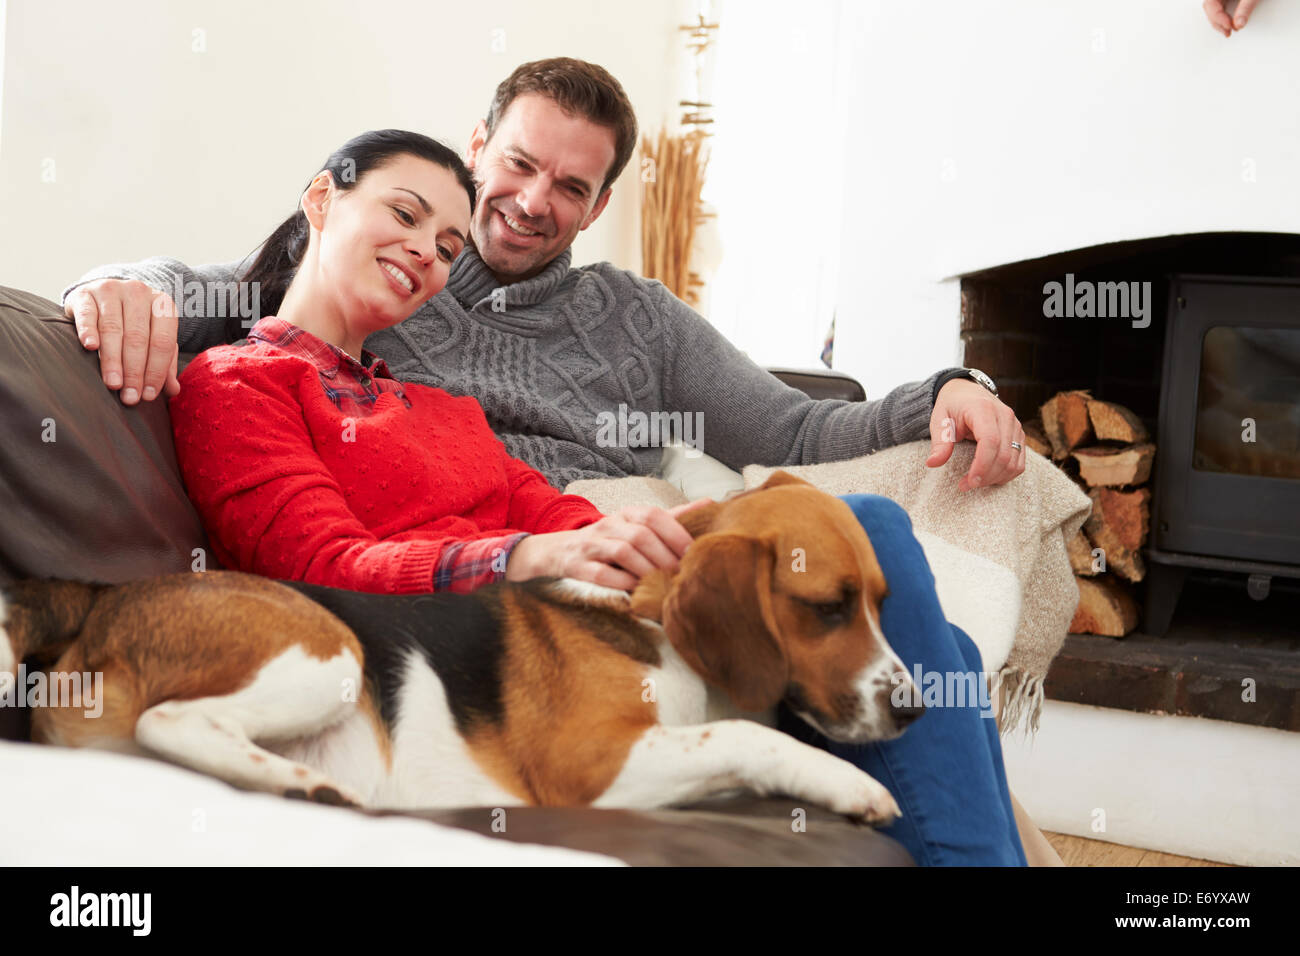 Couple Relaxing At Home With Pet Dog Stock Photo